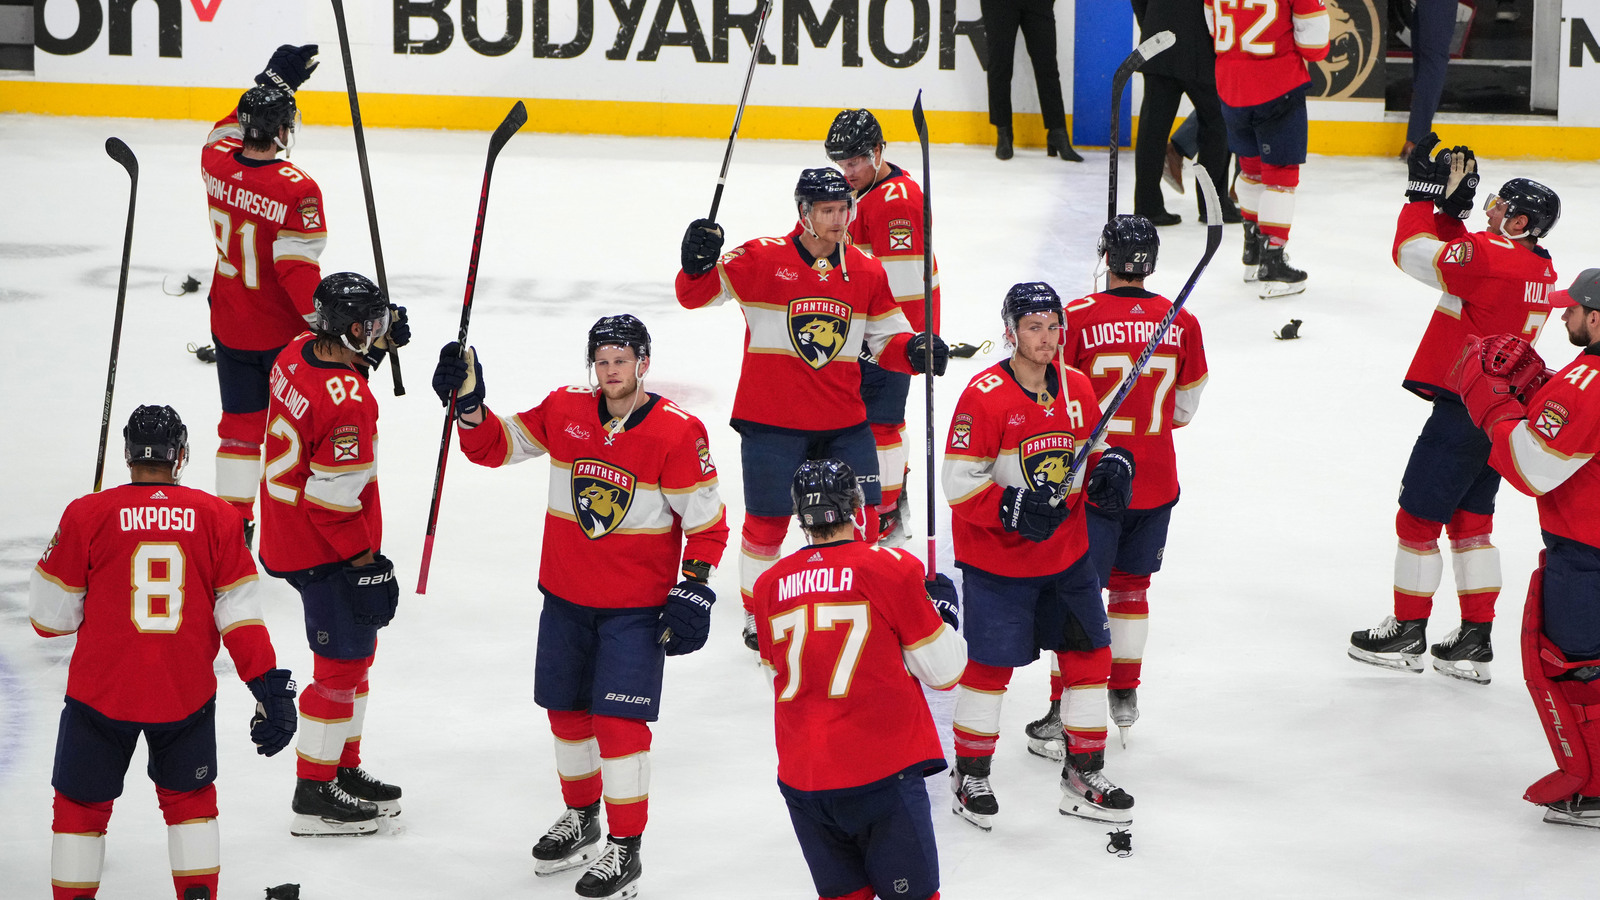 Florida Panthers Watch Cup Playoffs, Wait for Toronto or Boston